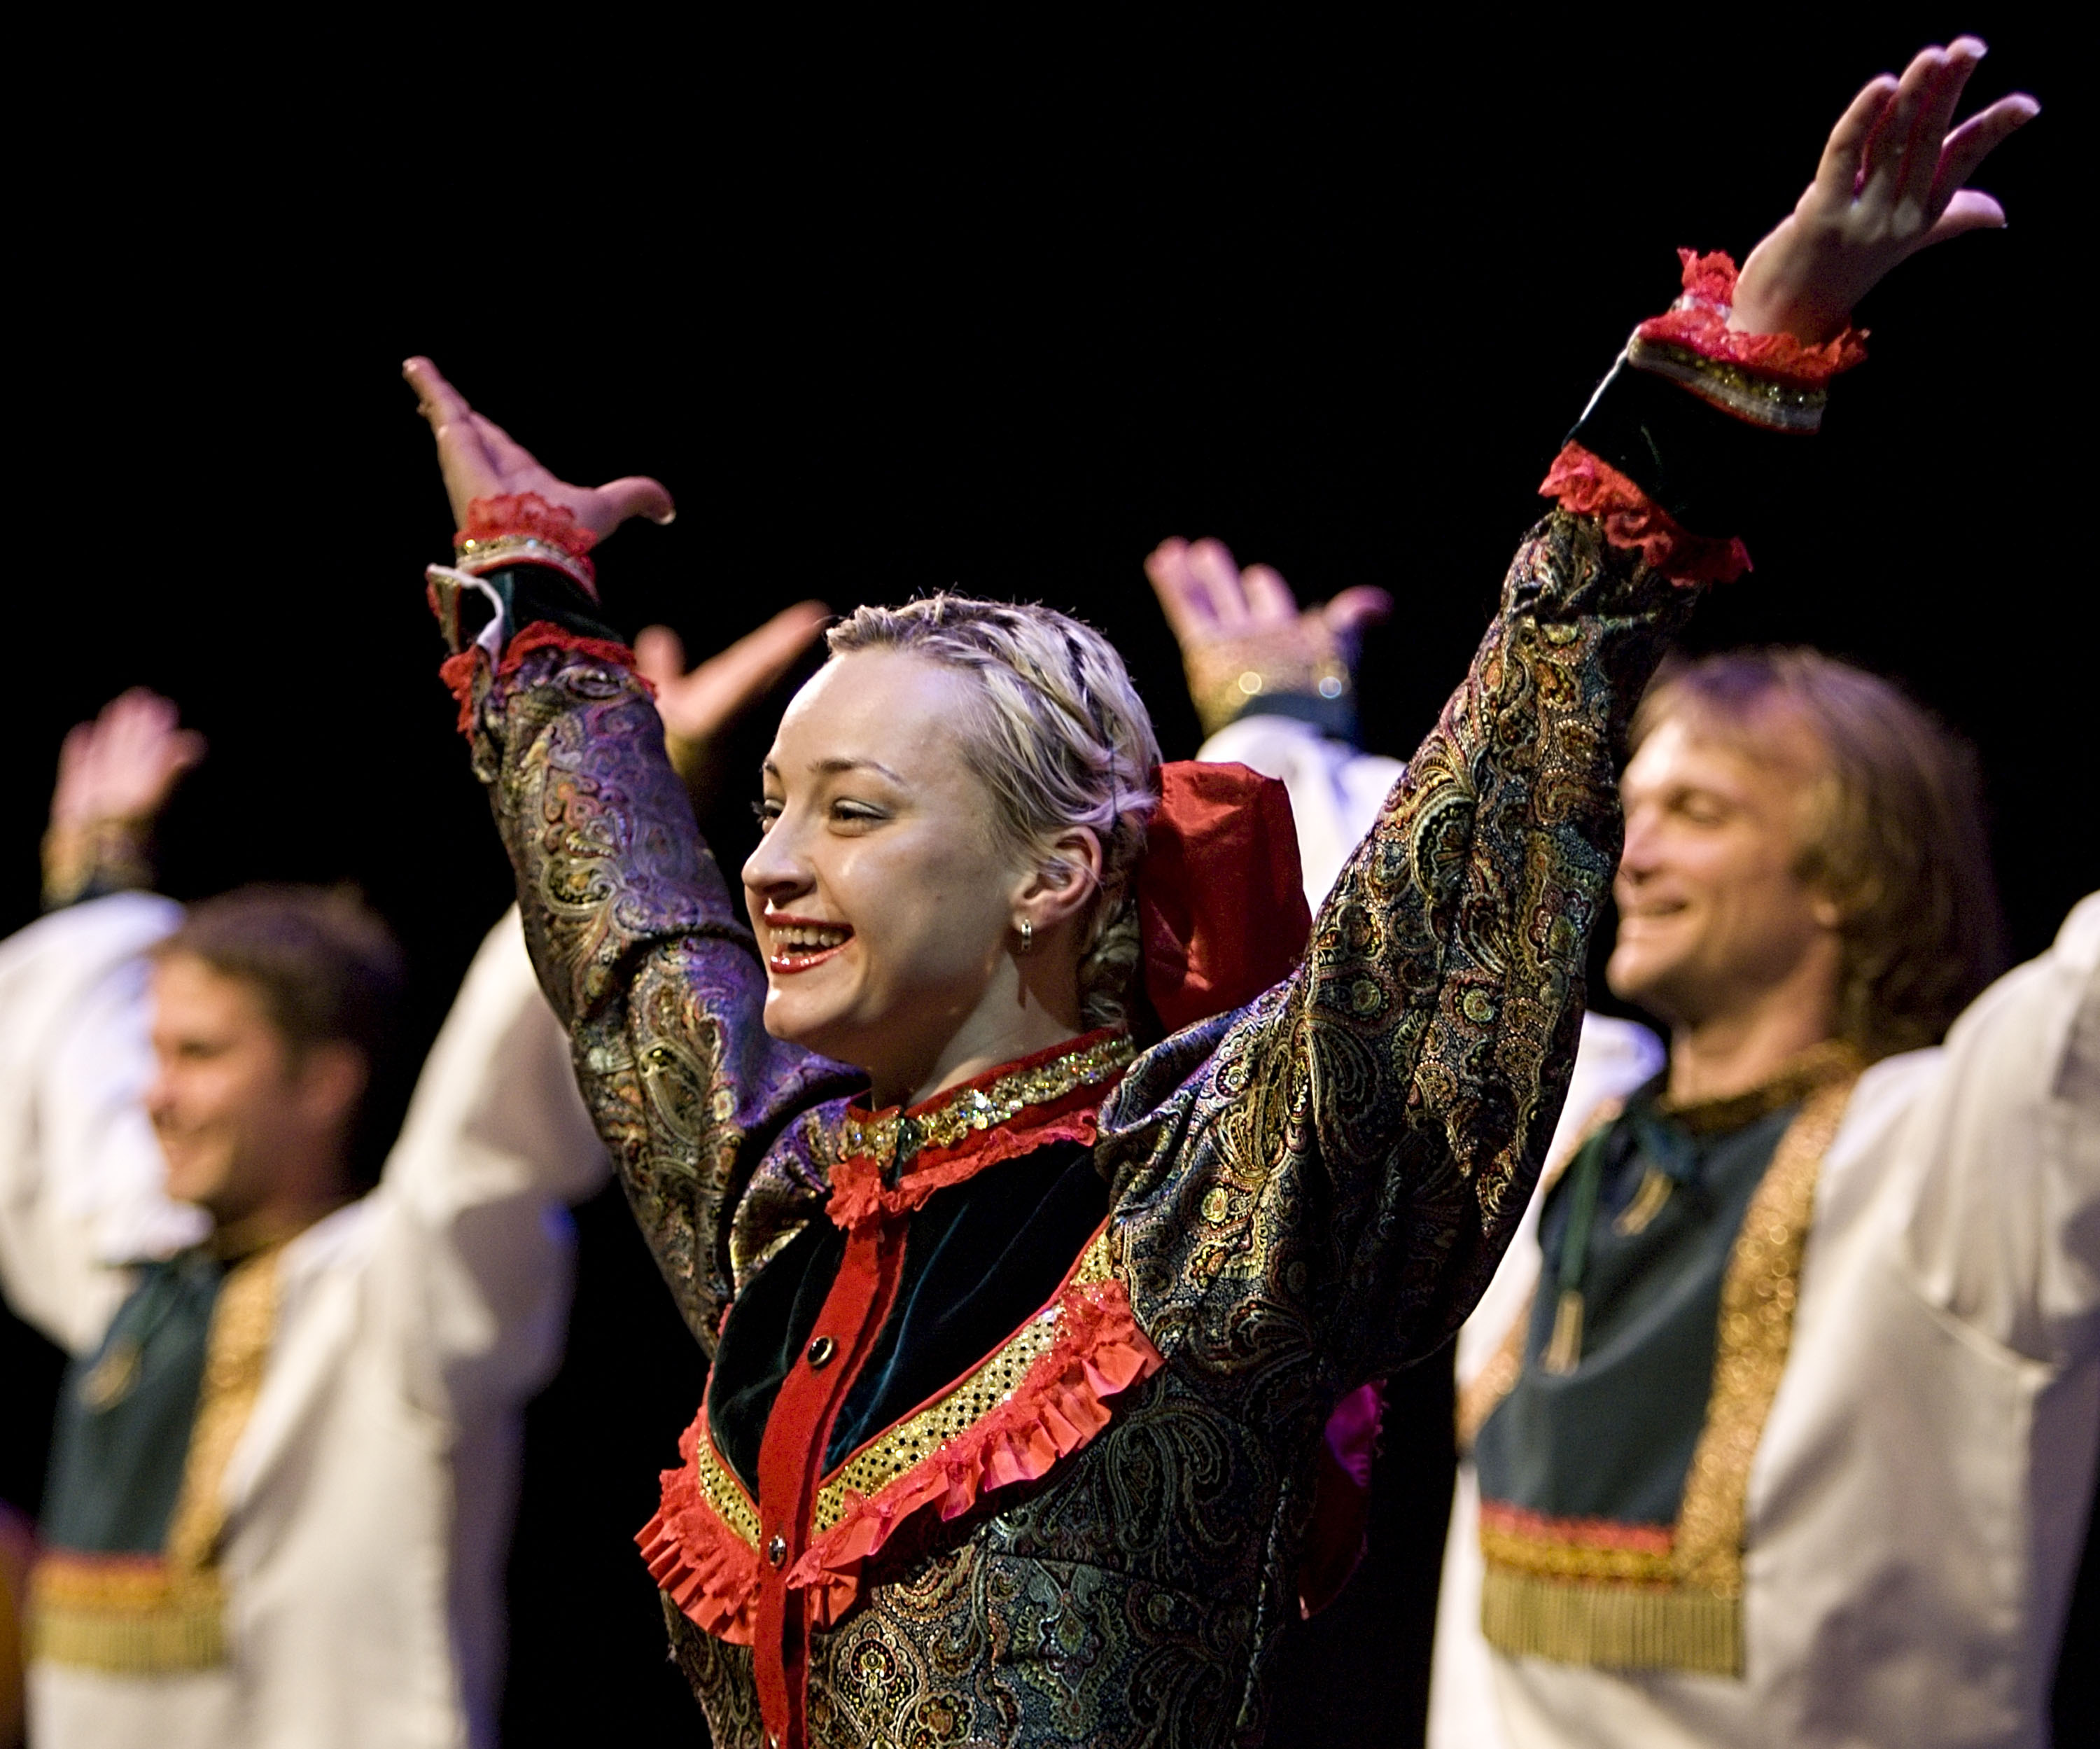 Russian song, dance and music ensemble Barynya from New York